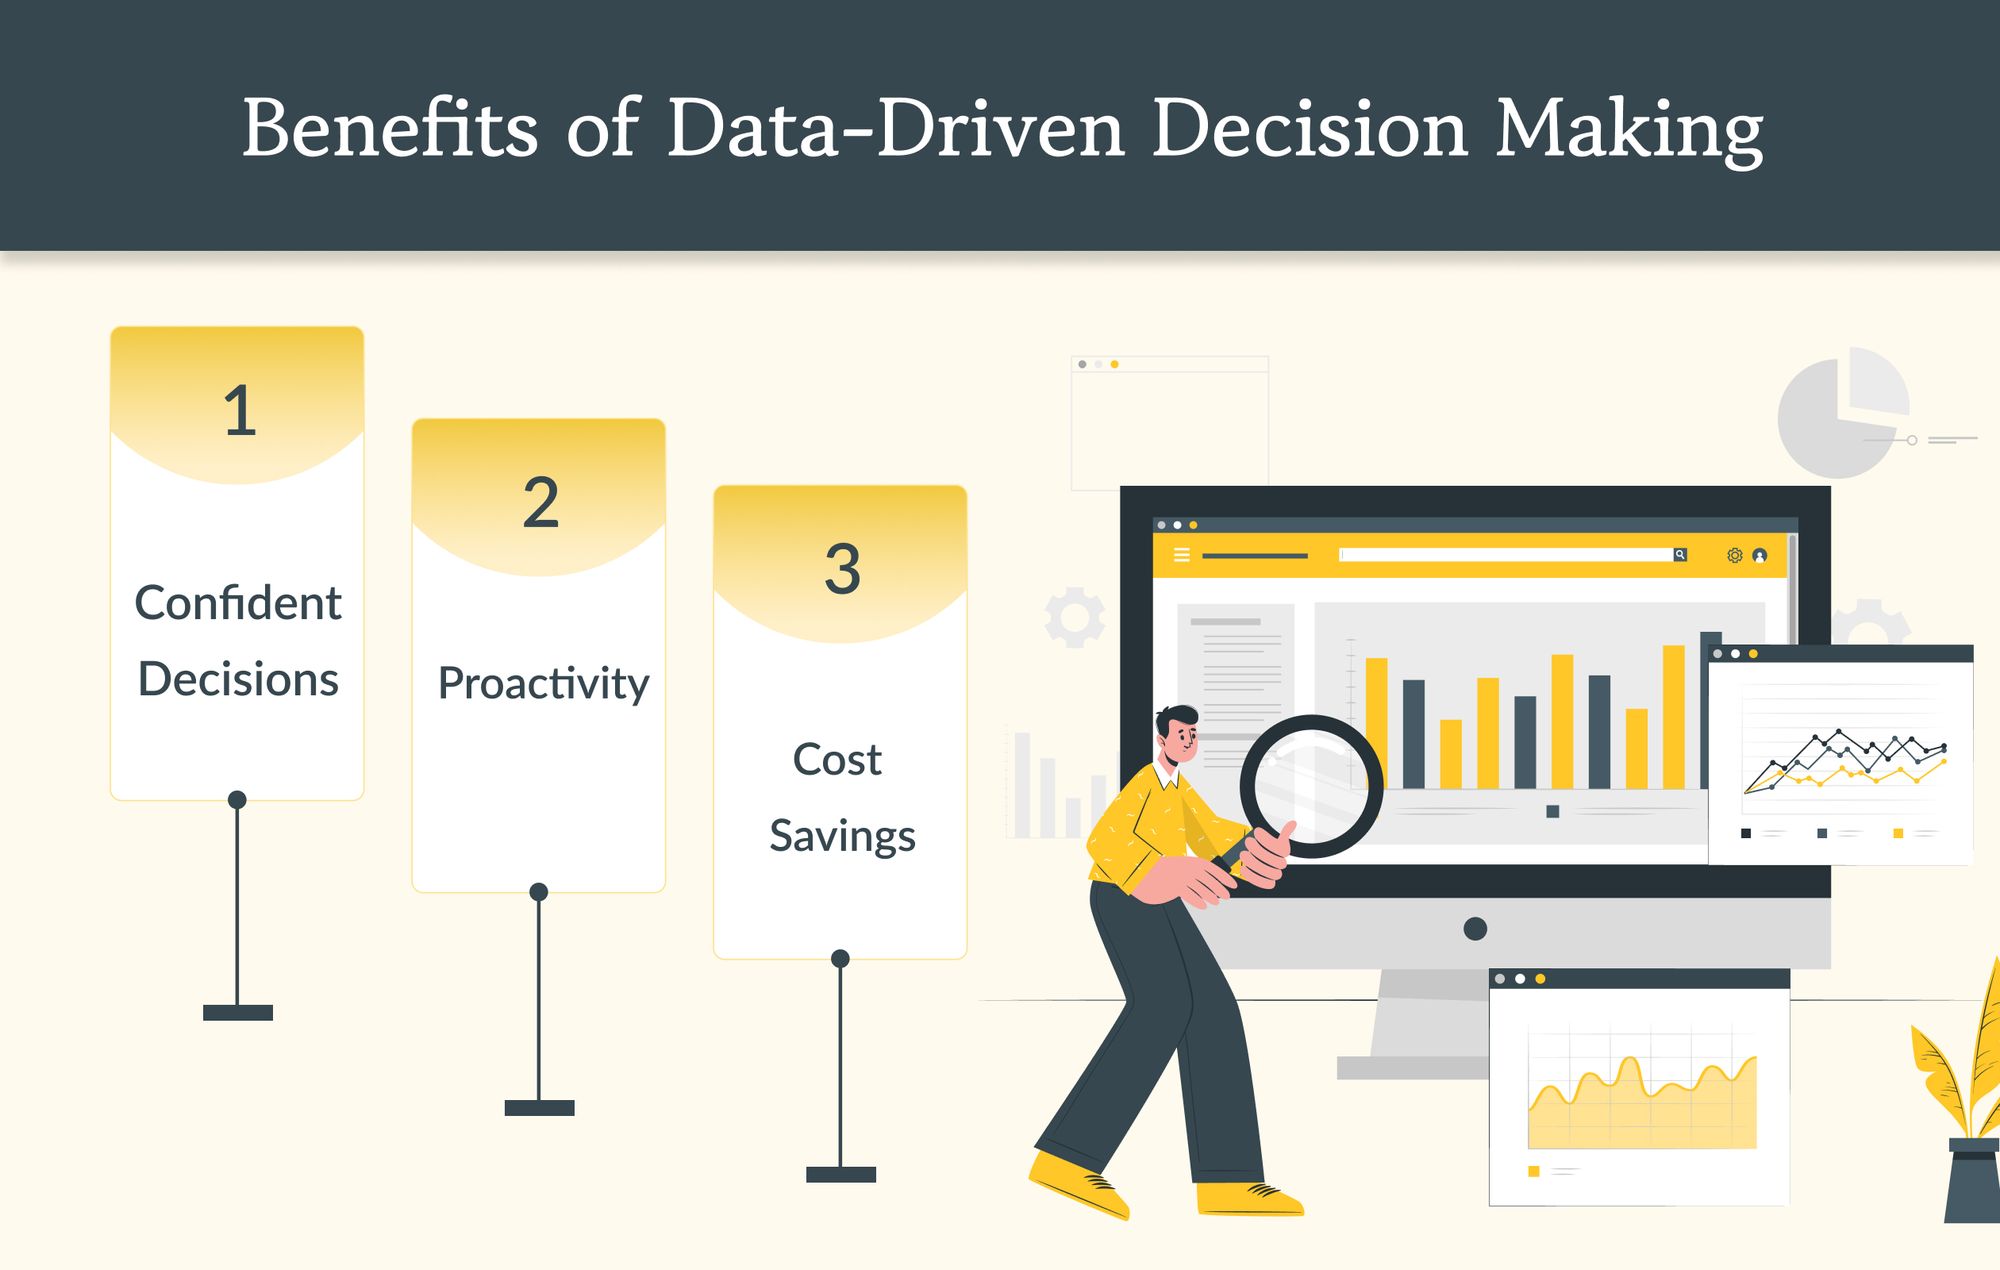 Benefits of Data-Driven Decision Making